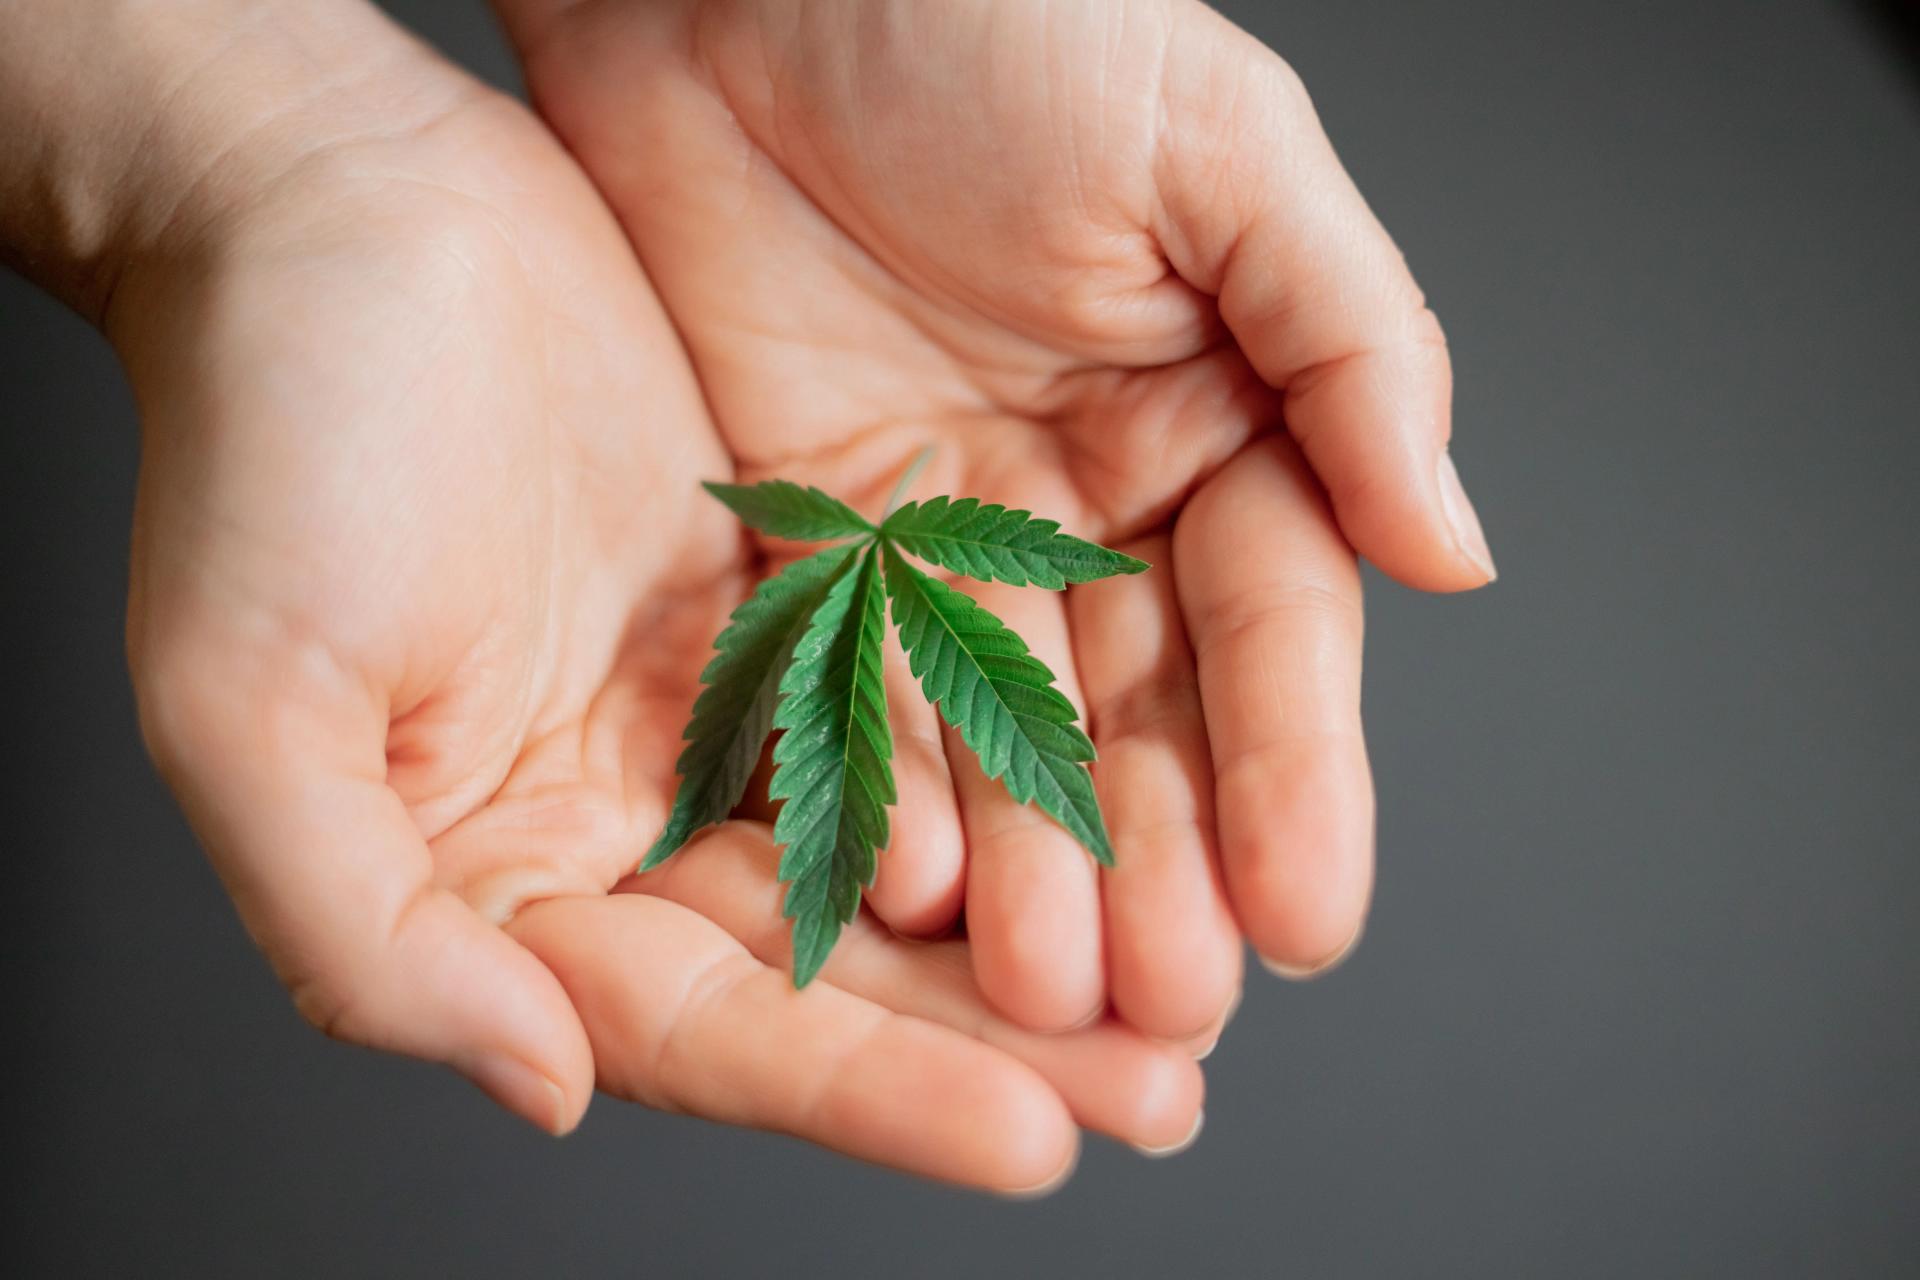 A Cannabis Leaf in Hands